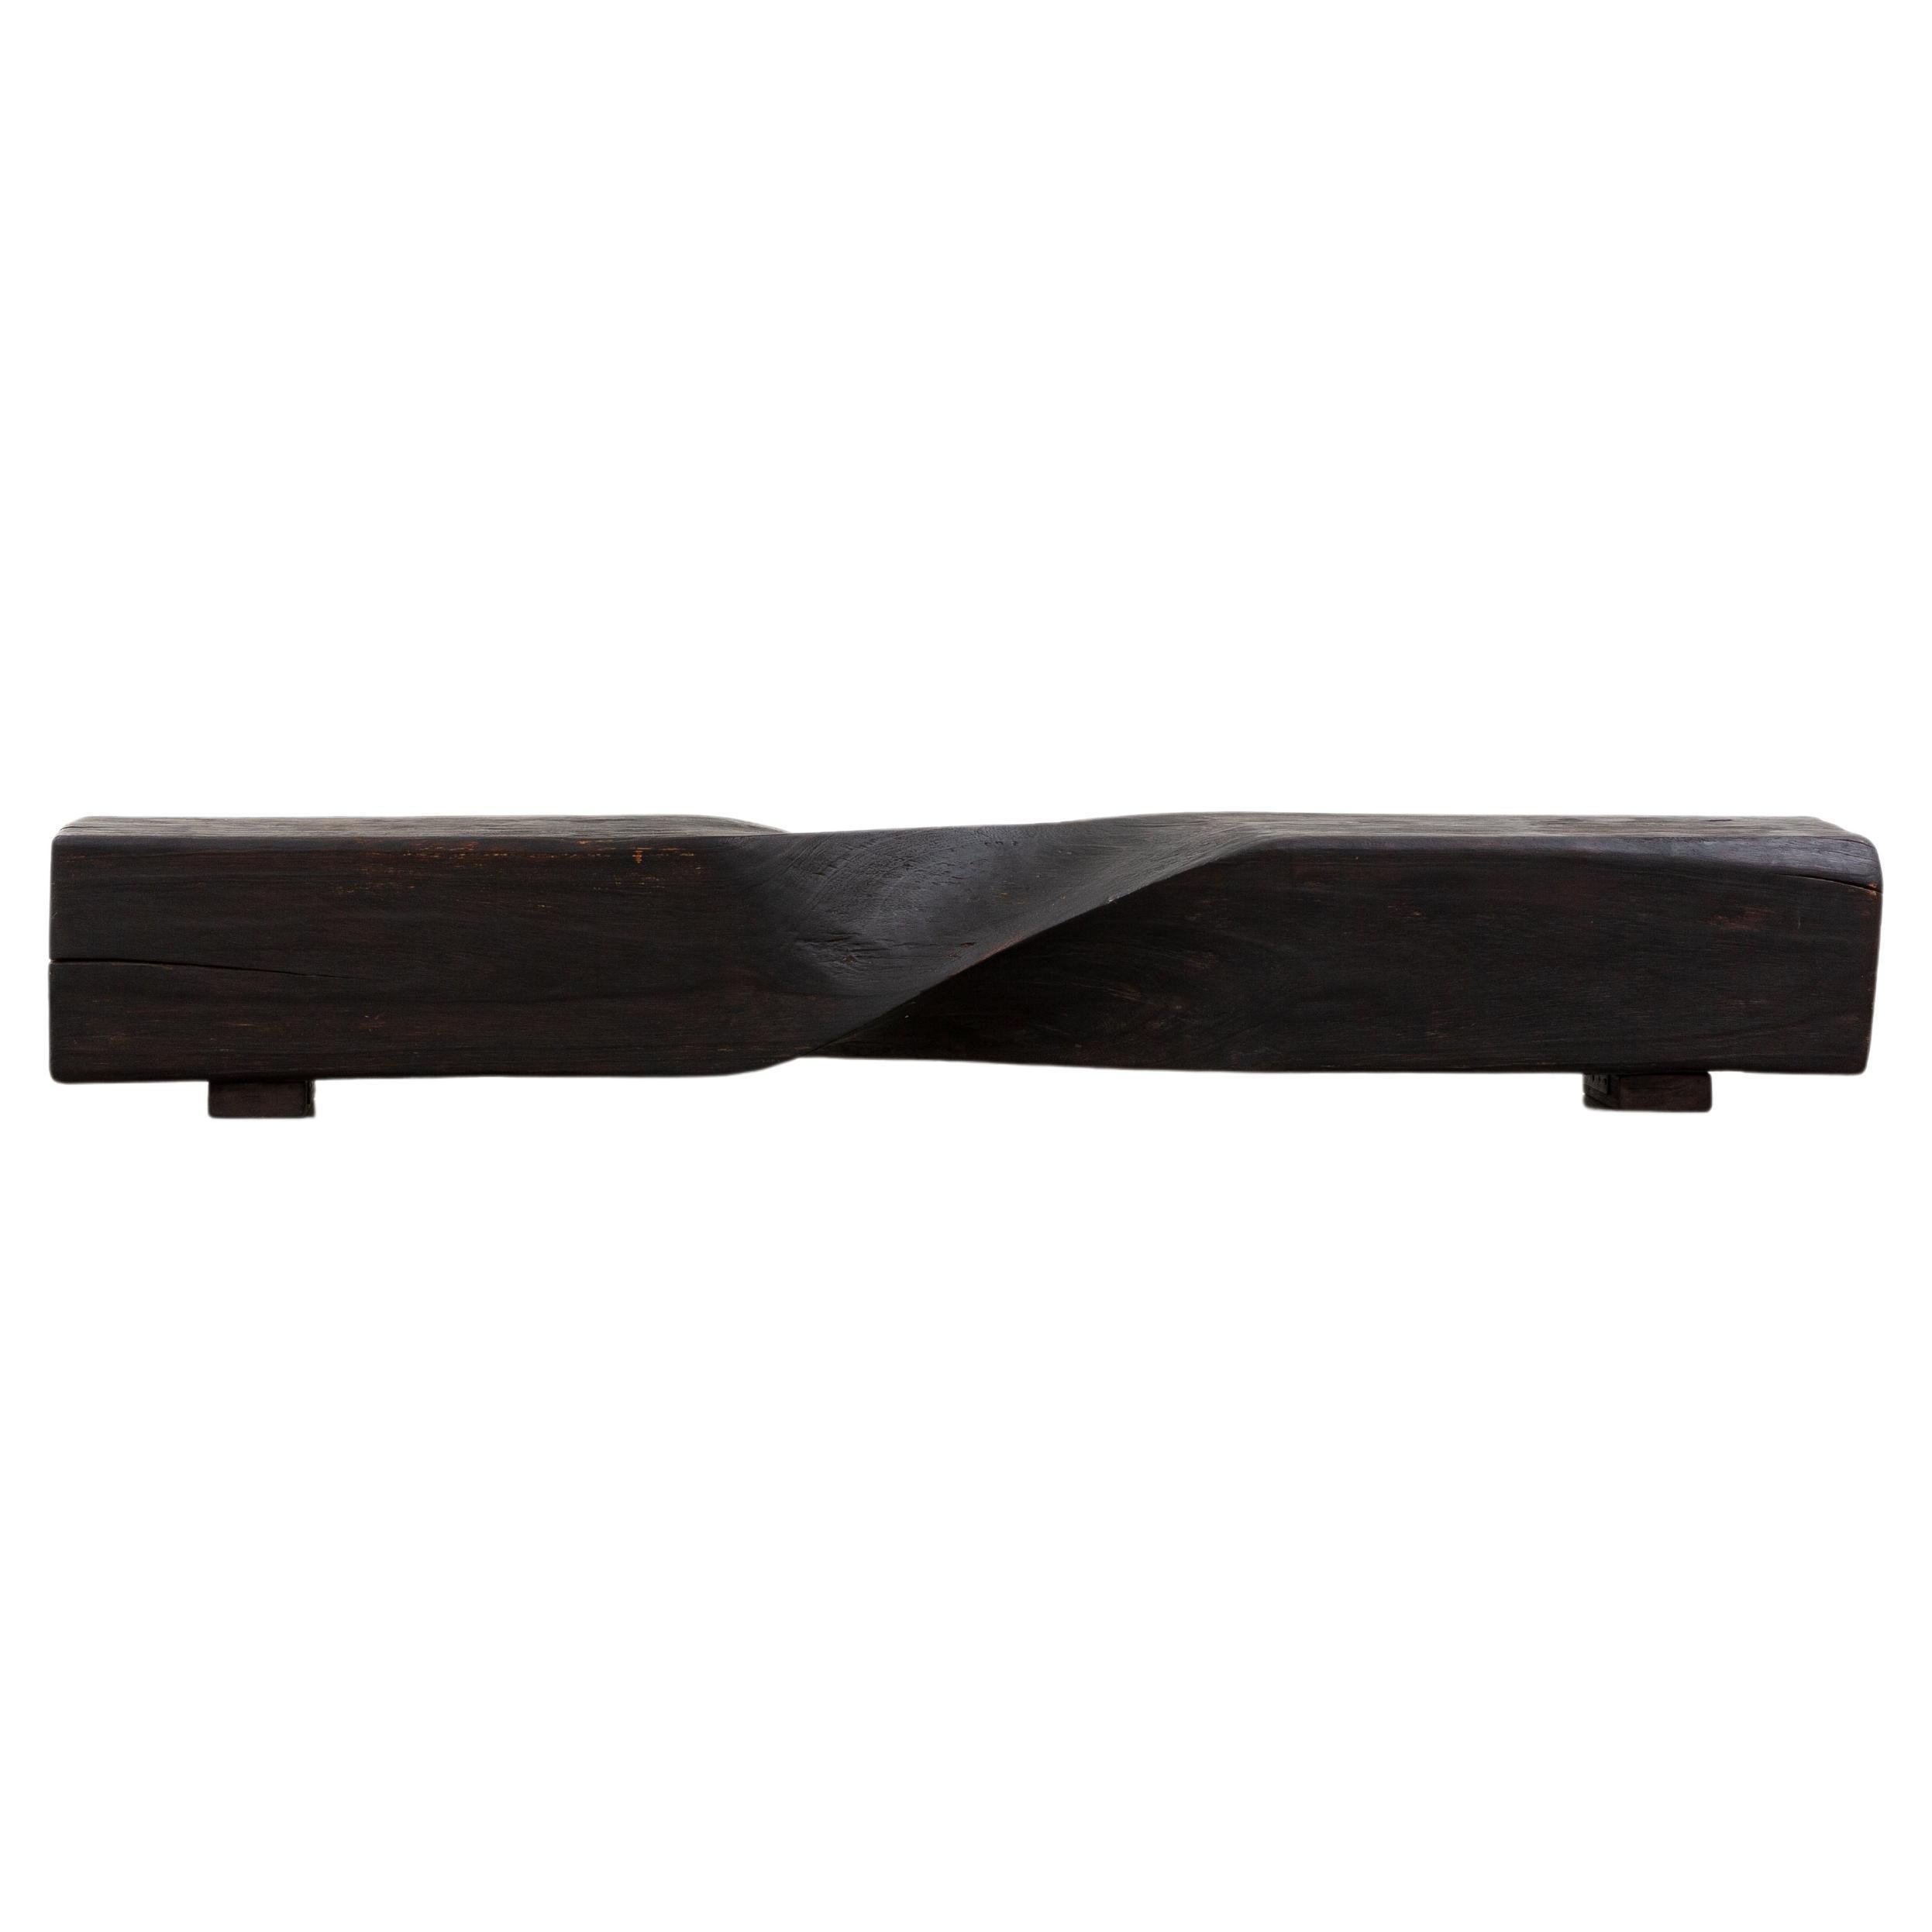 Twist Solid Wood Bench by CEU Studio, Represented by Tuleste Factory For Sale